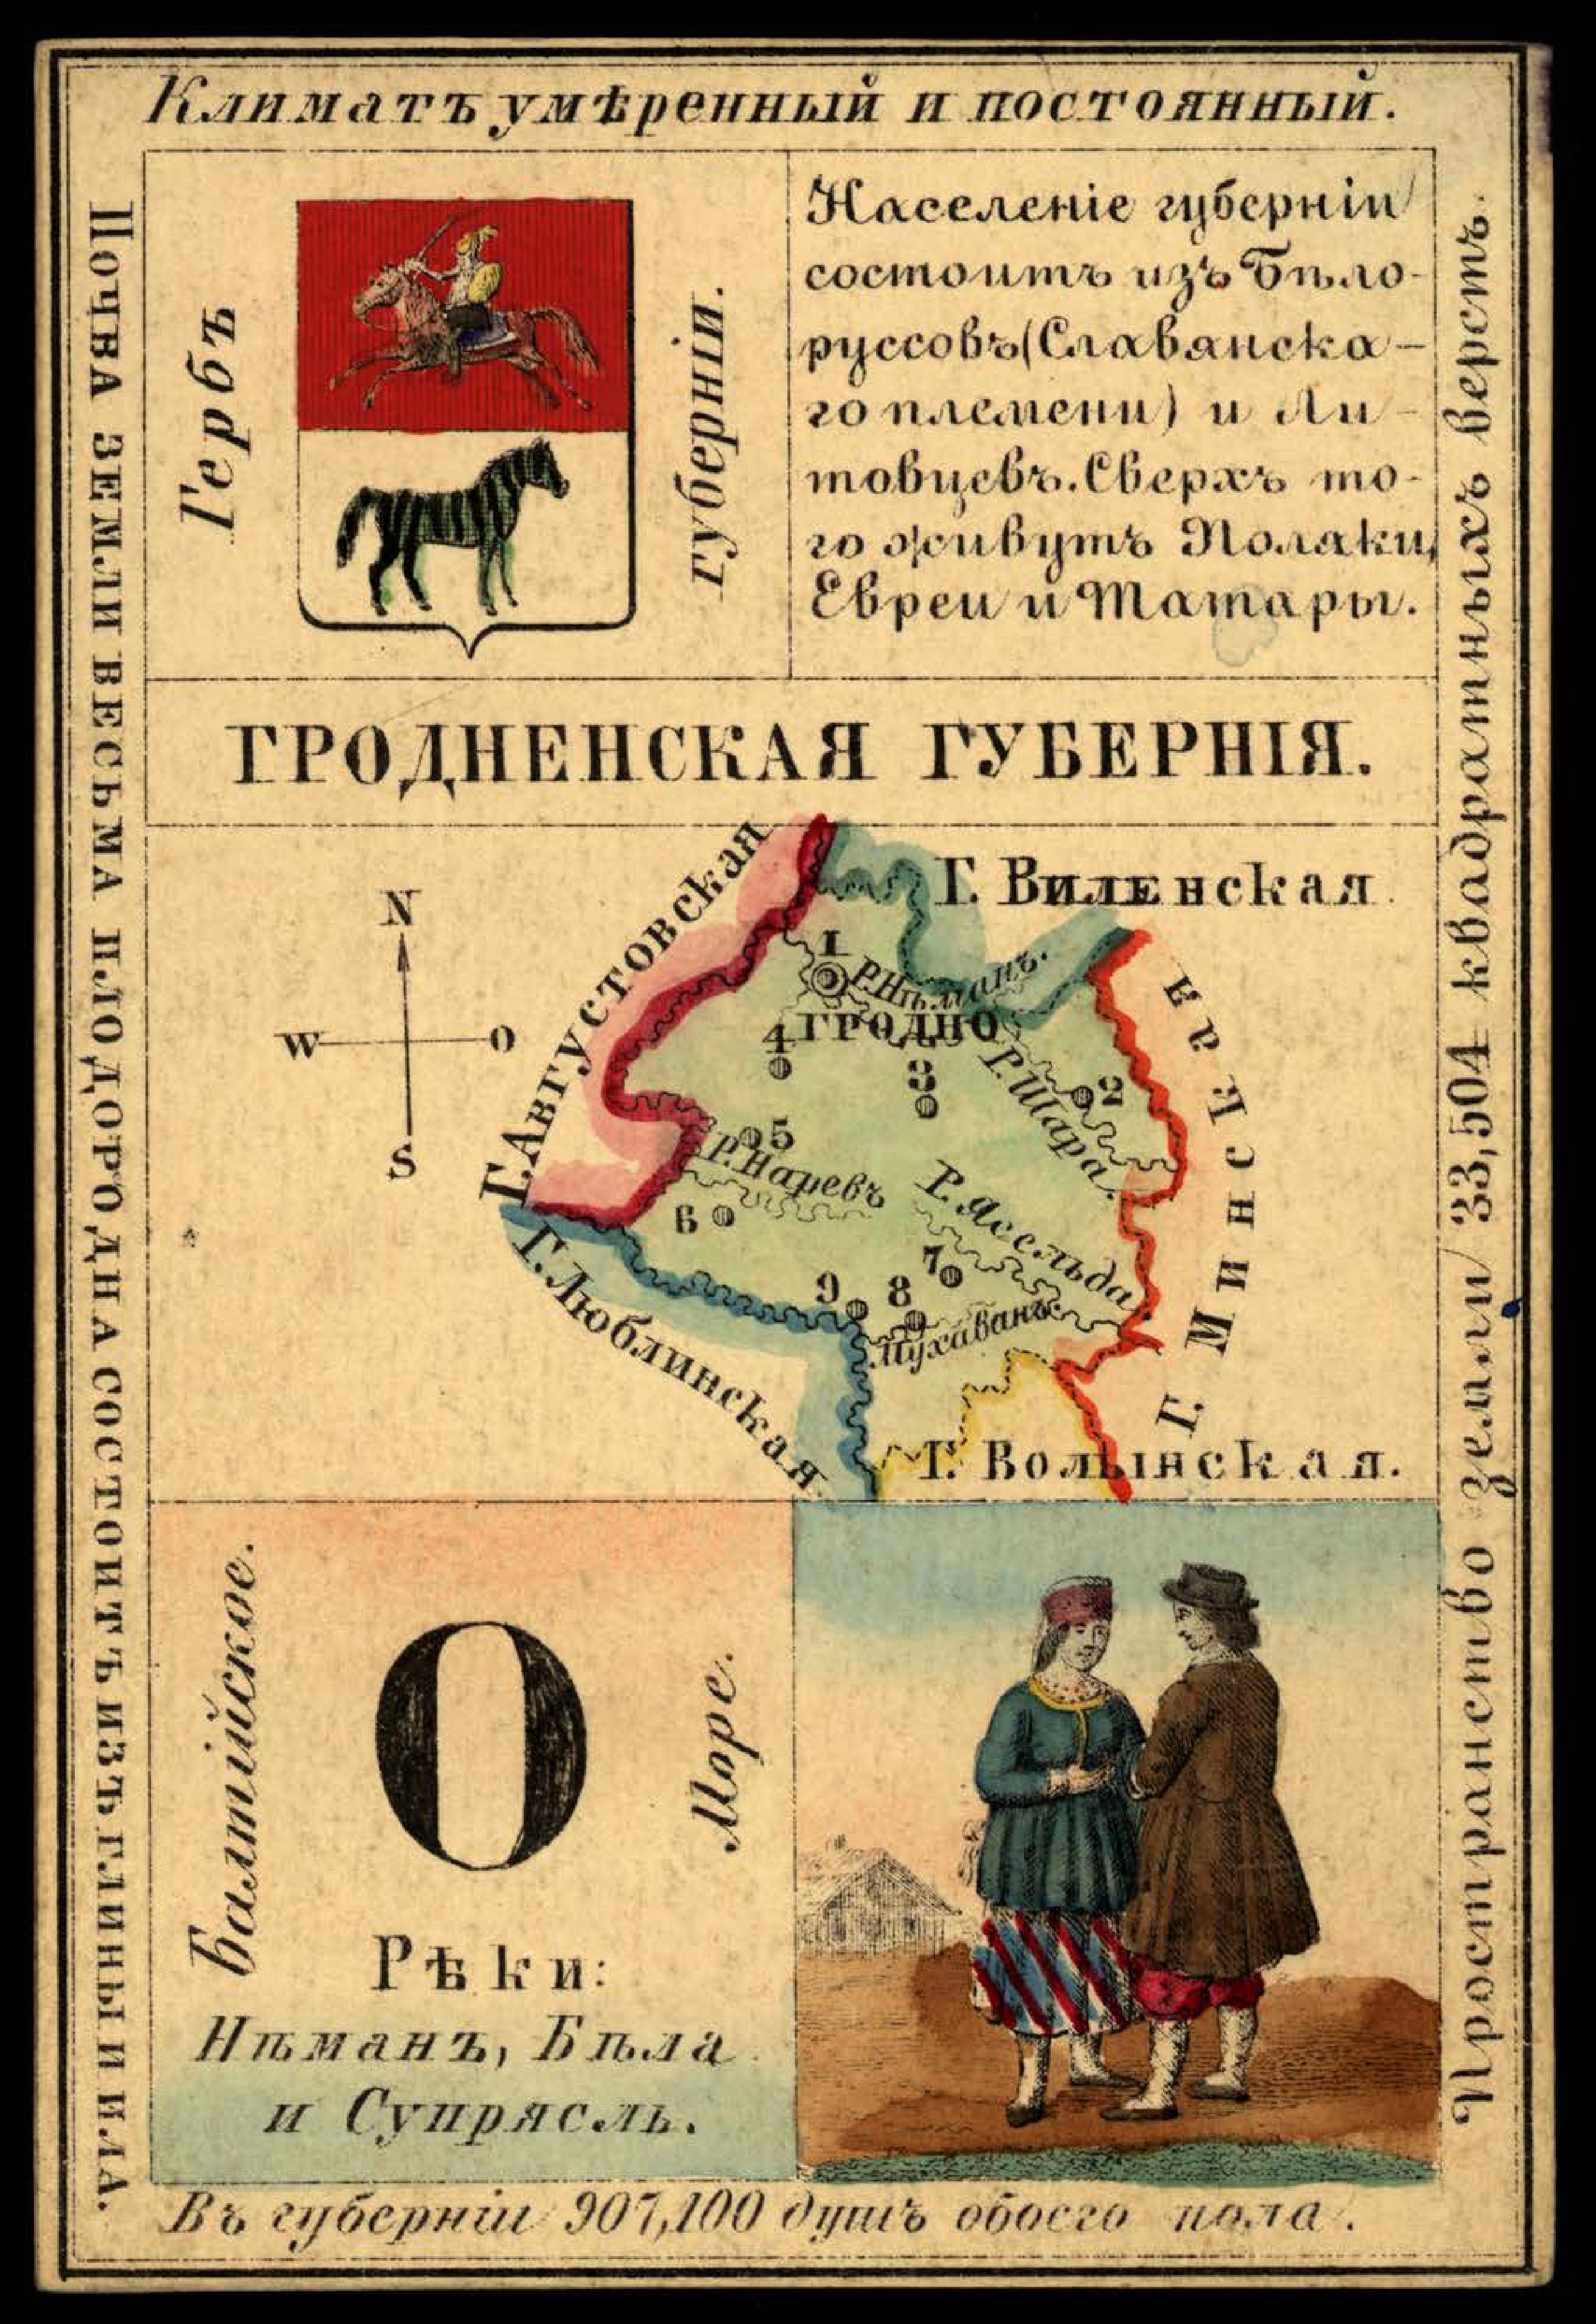 1856. Card from set of geographical cards of the Russian Empire 034